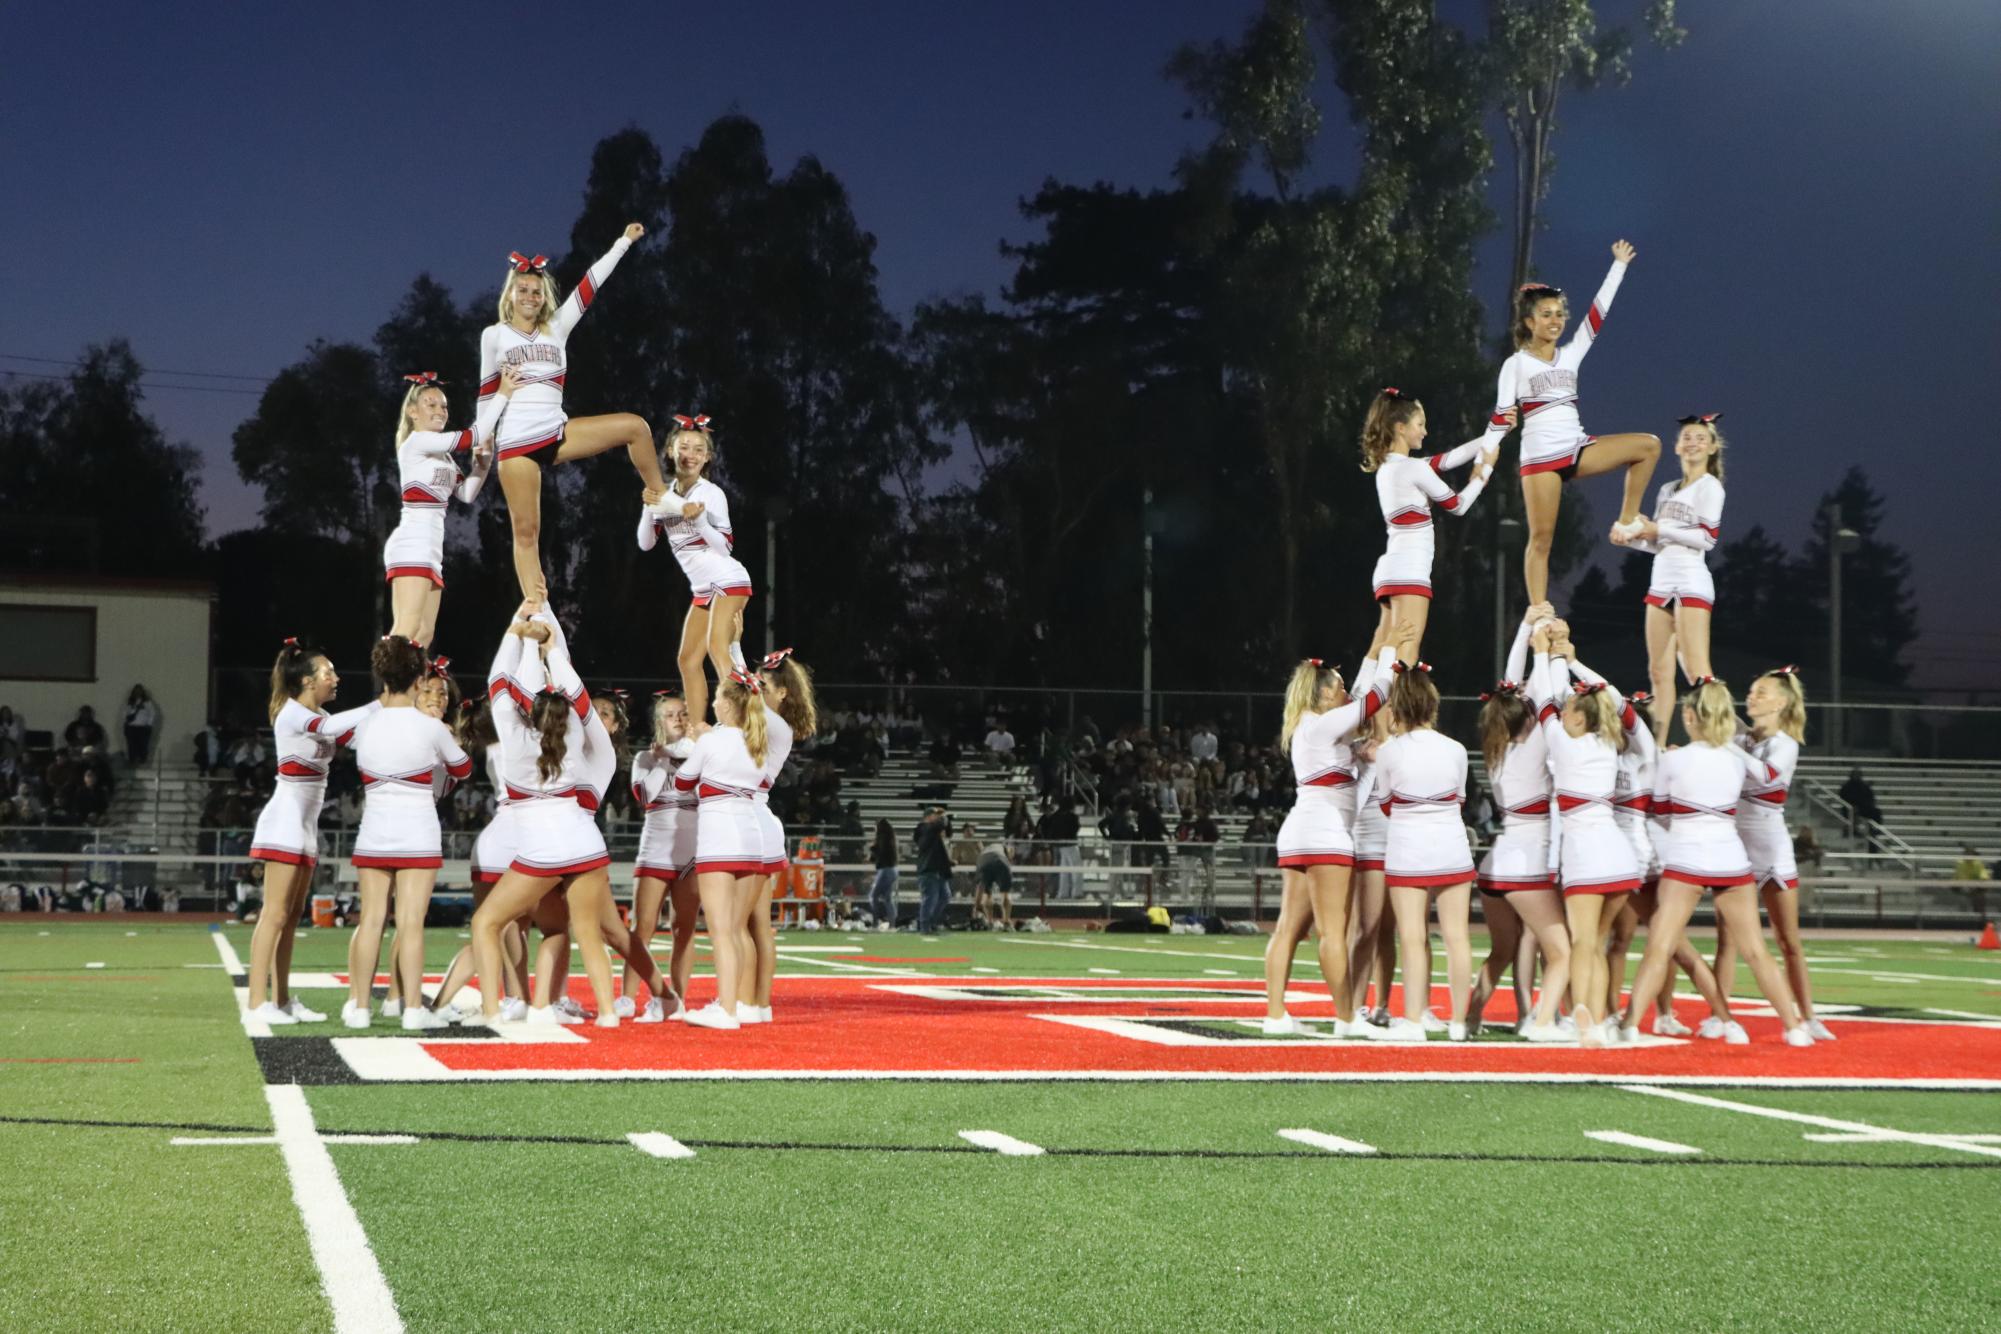 The cheer team executes a stunt to conclude the halftime performance at a football game against Capuchino High School on Aug. 25.